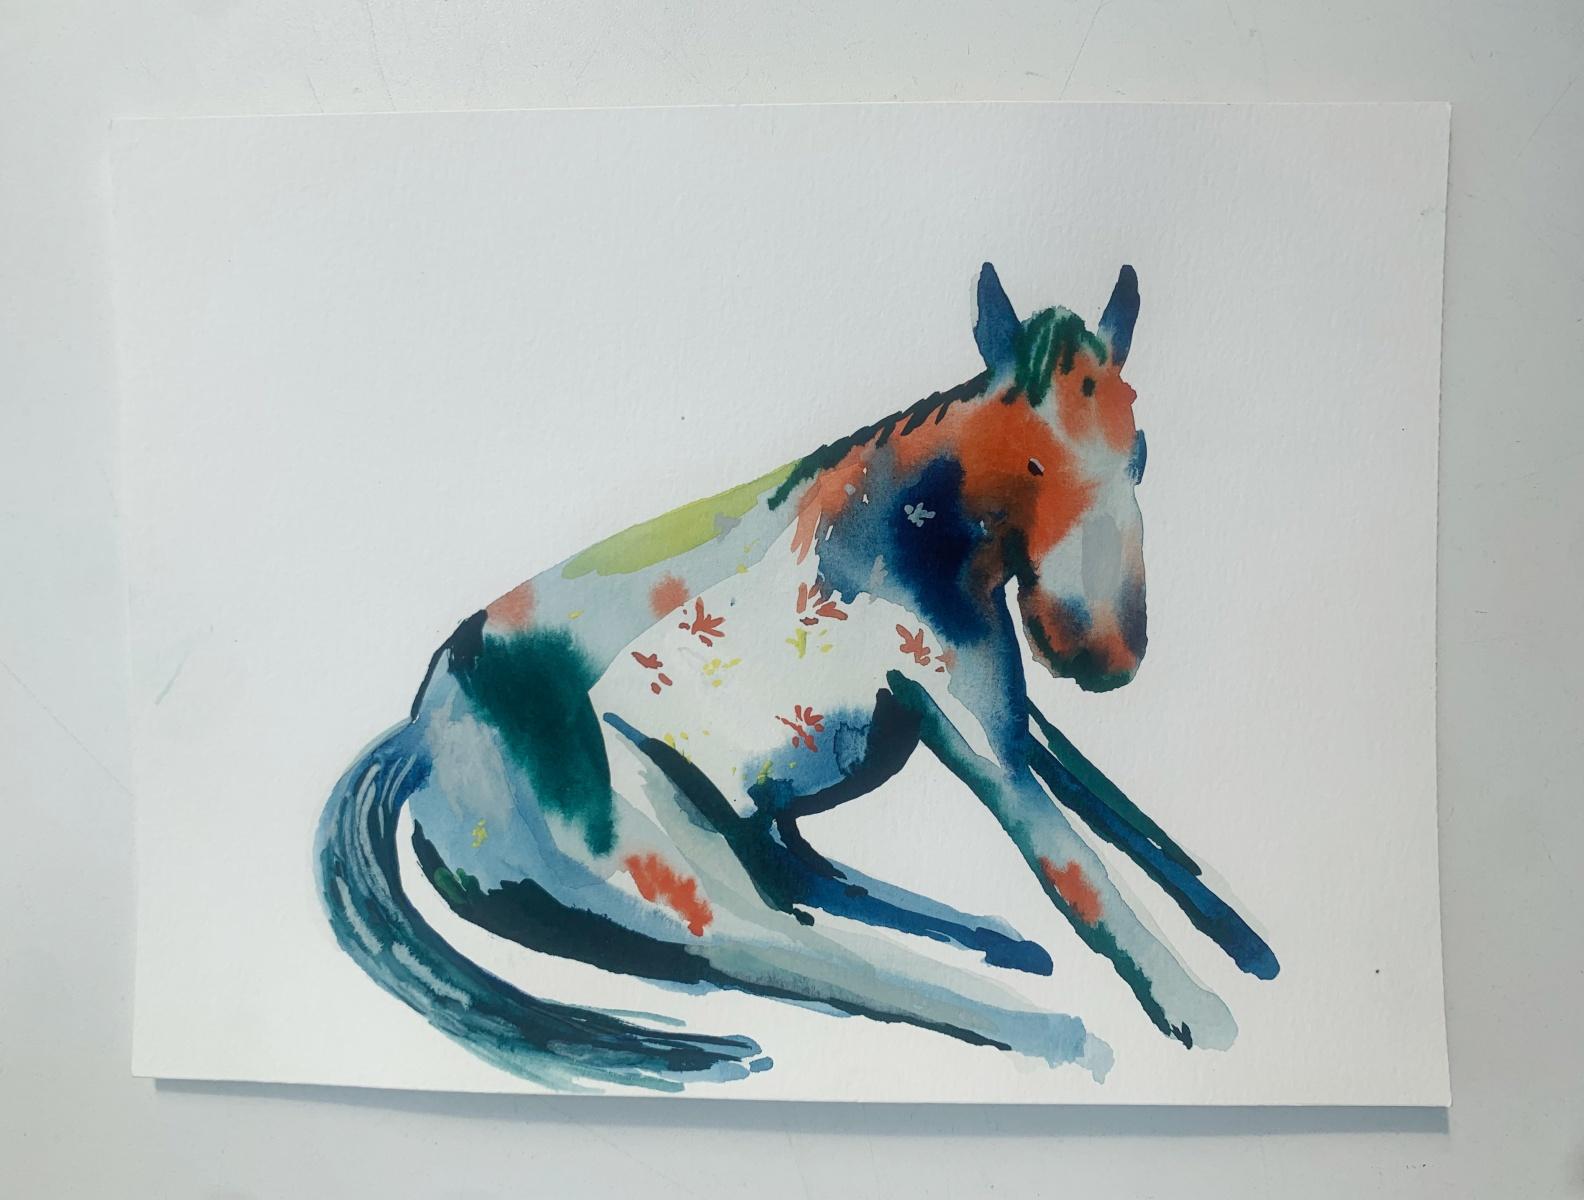 Contemporary figurative watercolor on paper painting by Polish artist living in Belgium Hanna Ilczyszyn. Artwork depicts a horse. Painting is colorful. It was created during art residency stay in Sardinia. 

HANNA ILCZYSZYN (b. 1984)
Graduated from